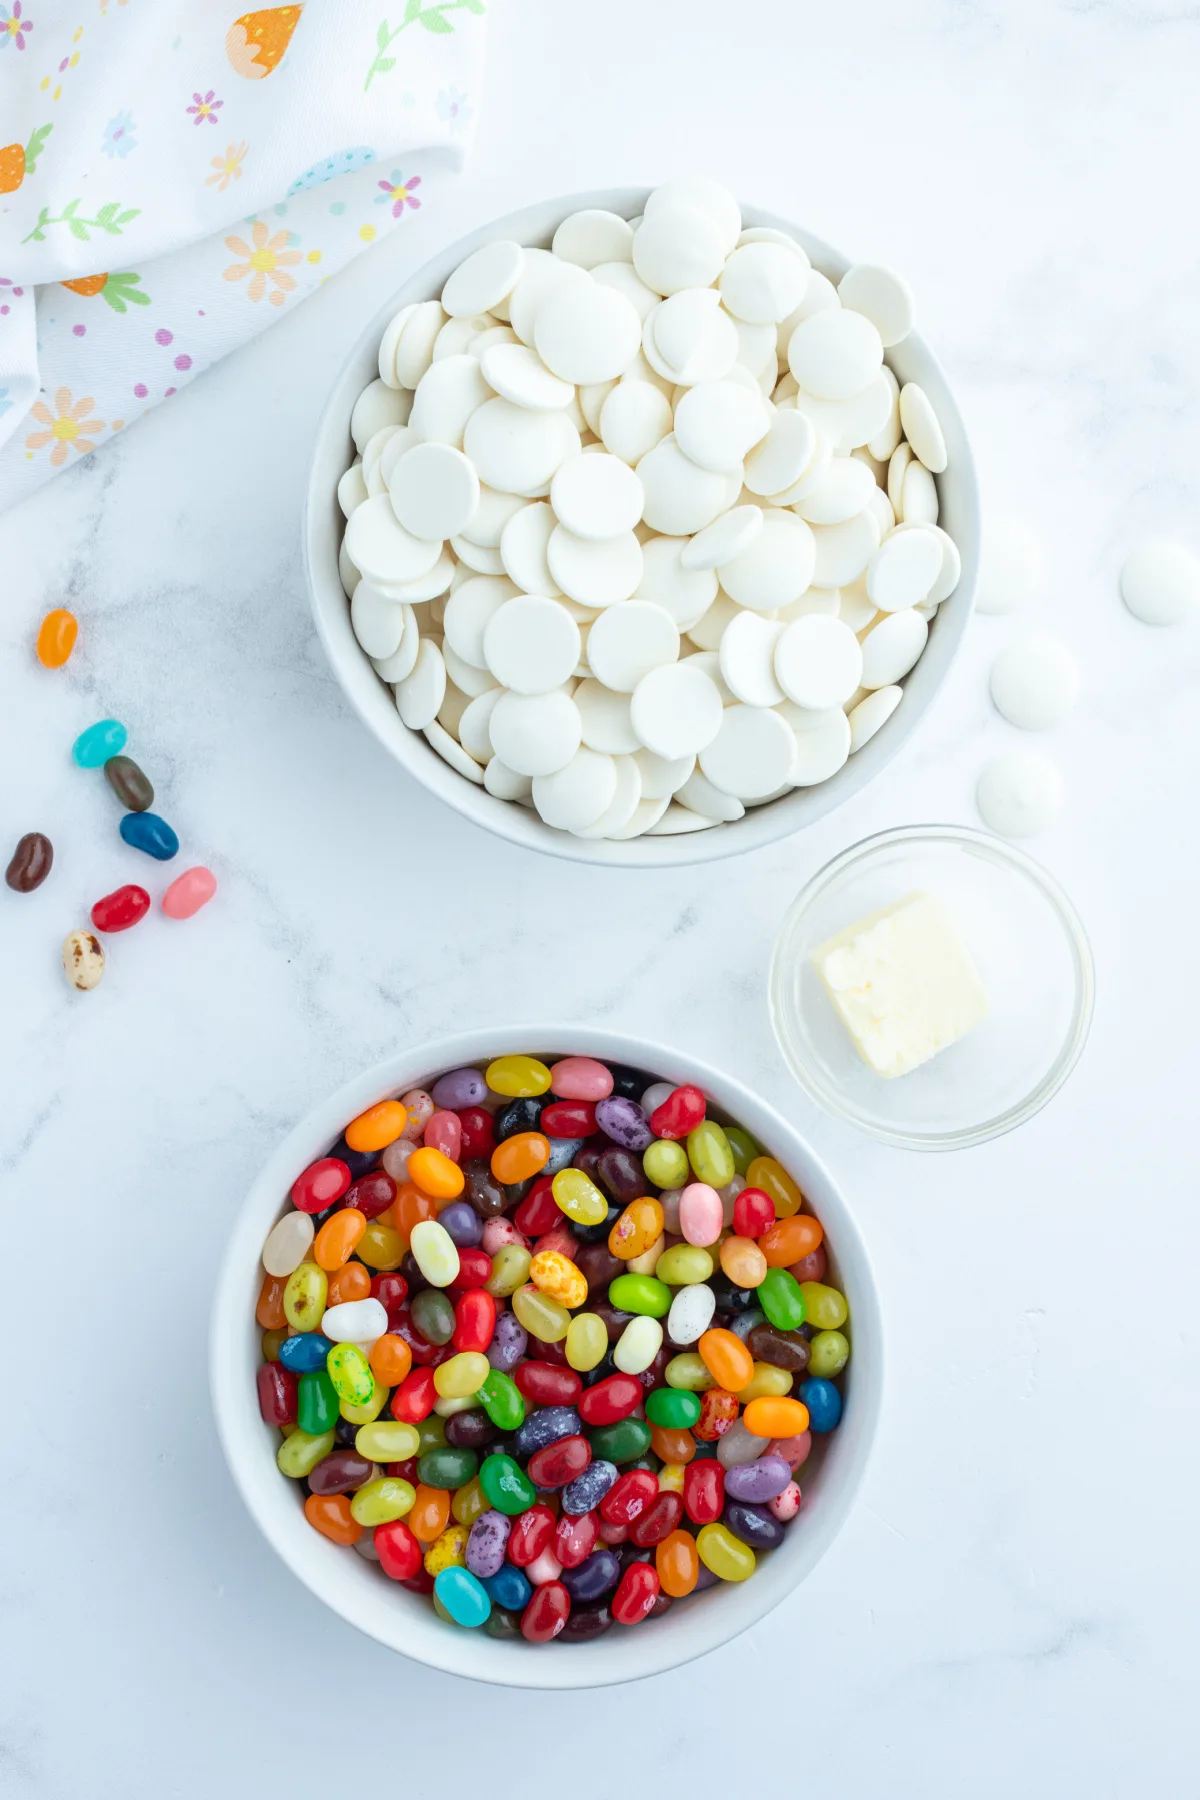 ingredients displayed for making jelly bean bark